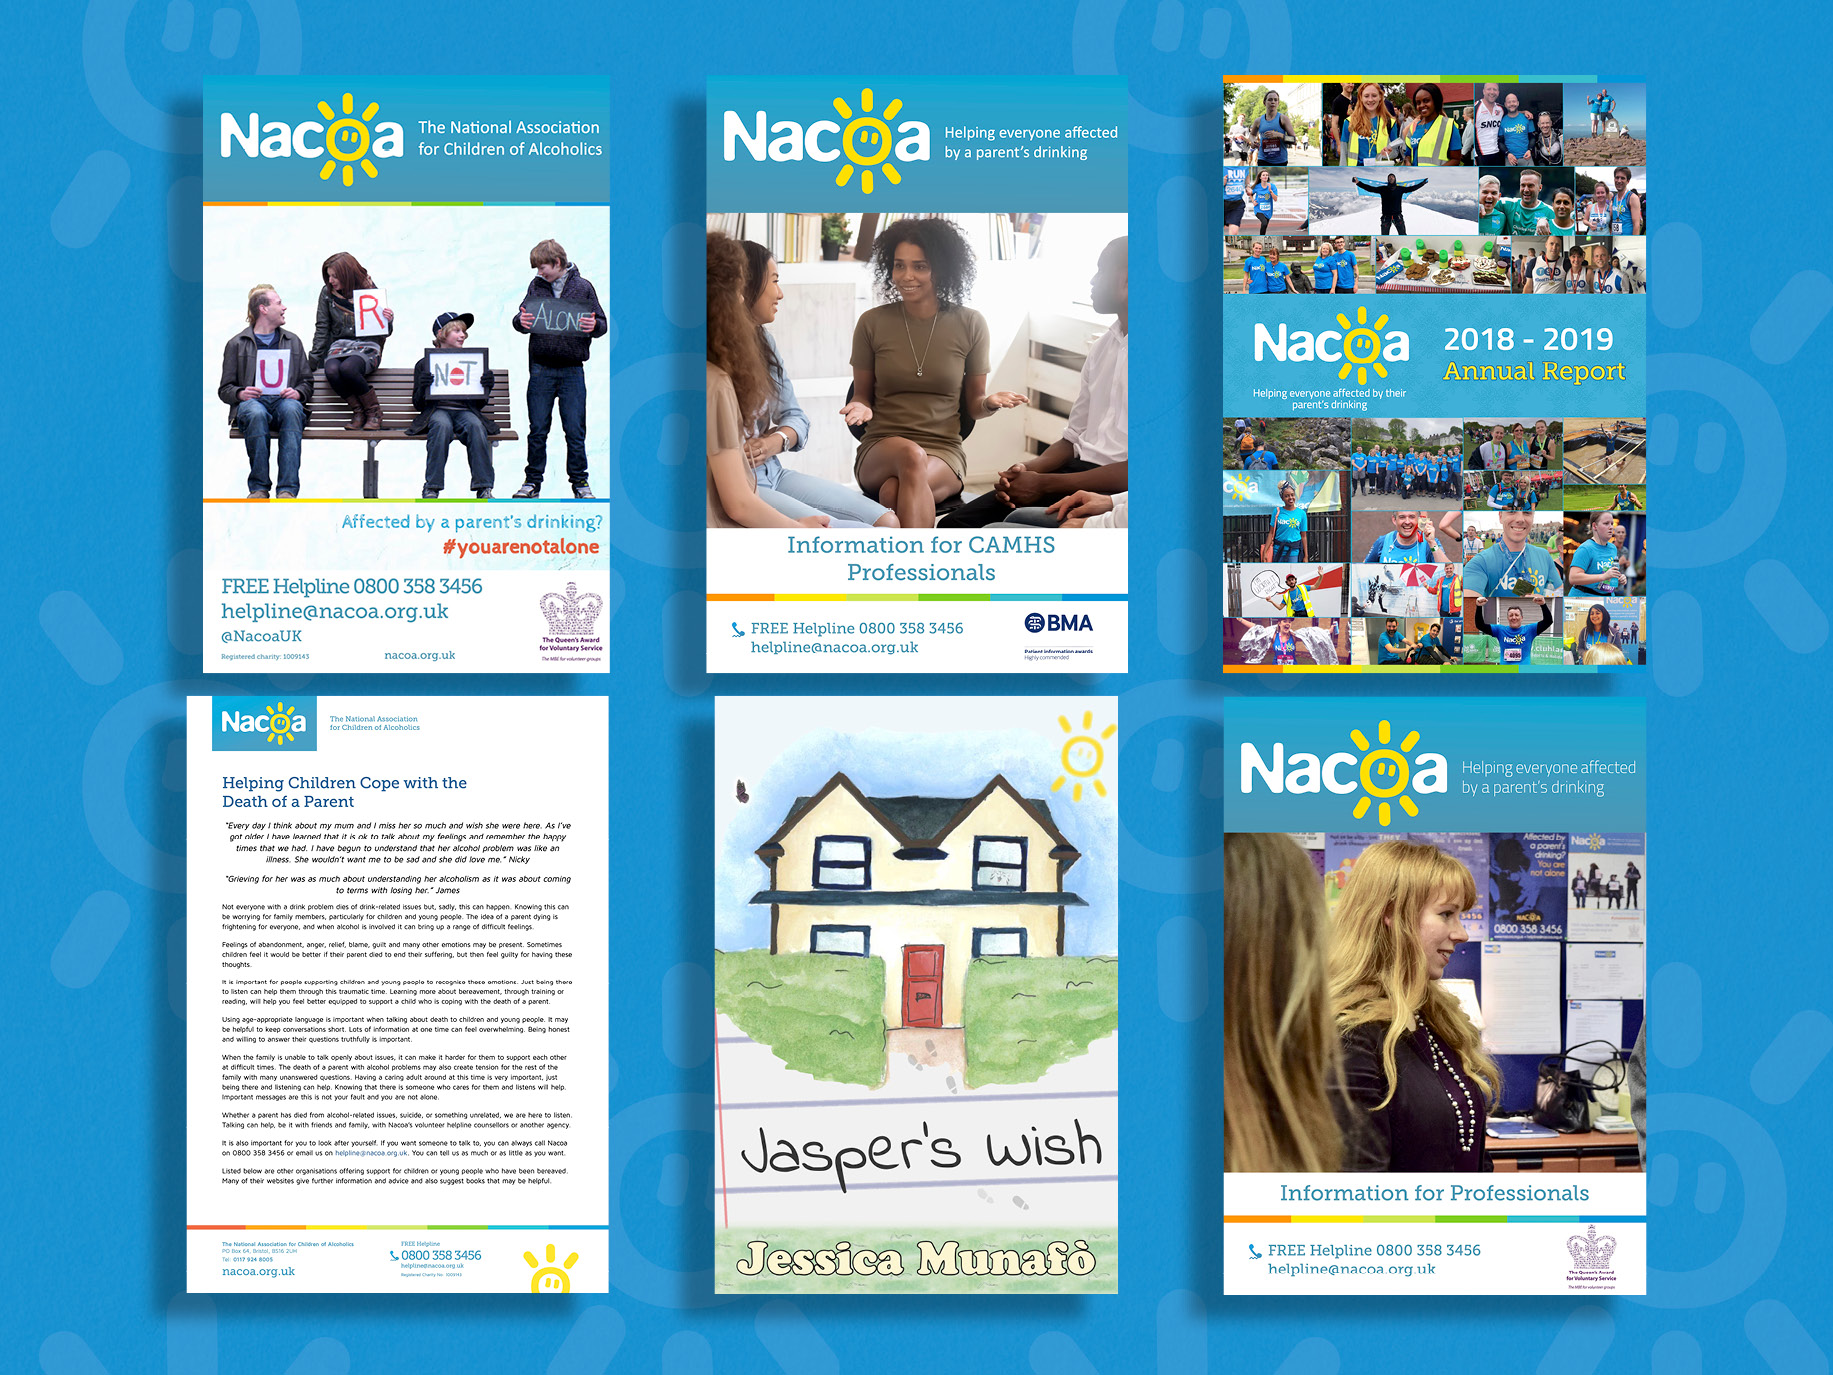 Nacoa's publications about coping with a parent's drinking for children, adults, concerned others and professionals